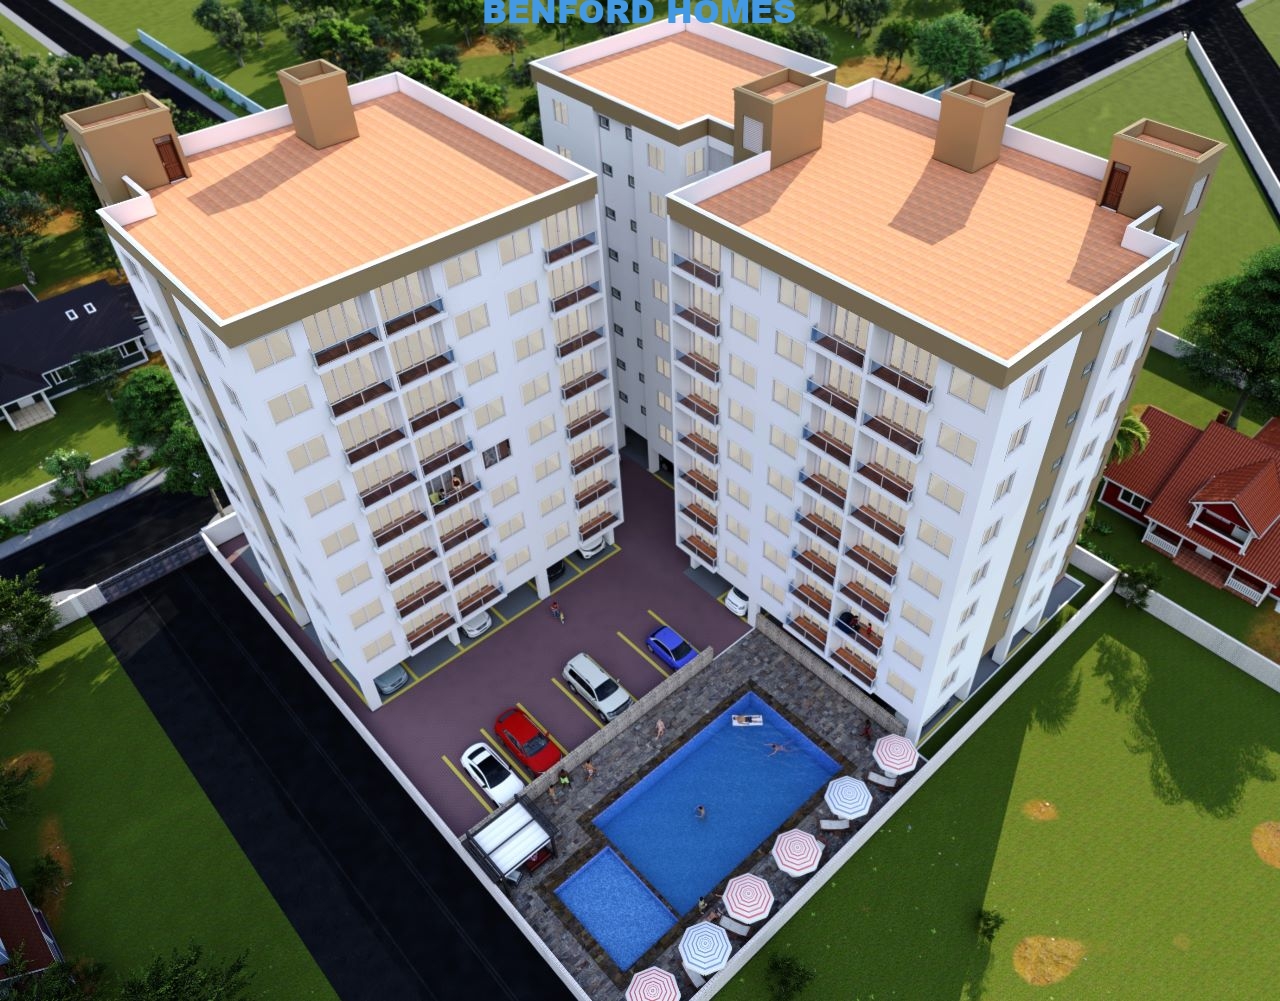 2 Bedroom Off Plan Apartment On Sale Greenwood Nyali Mombasa | Properties for sale Benford Homes